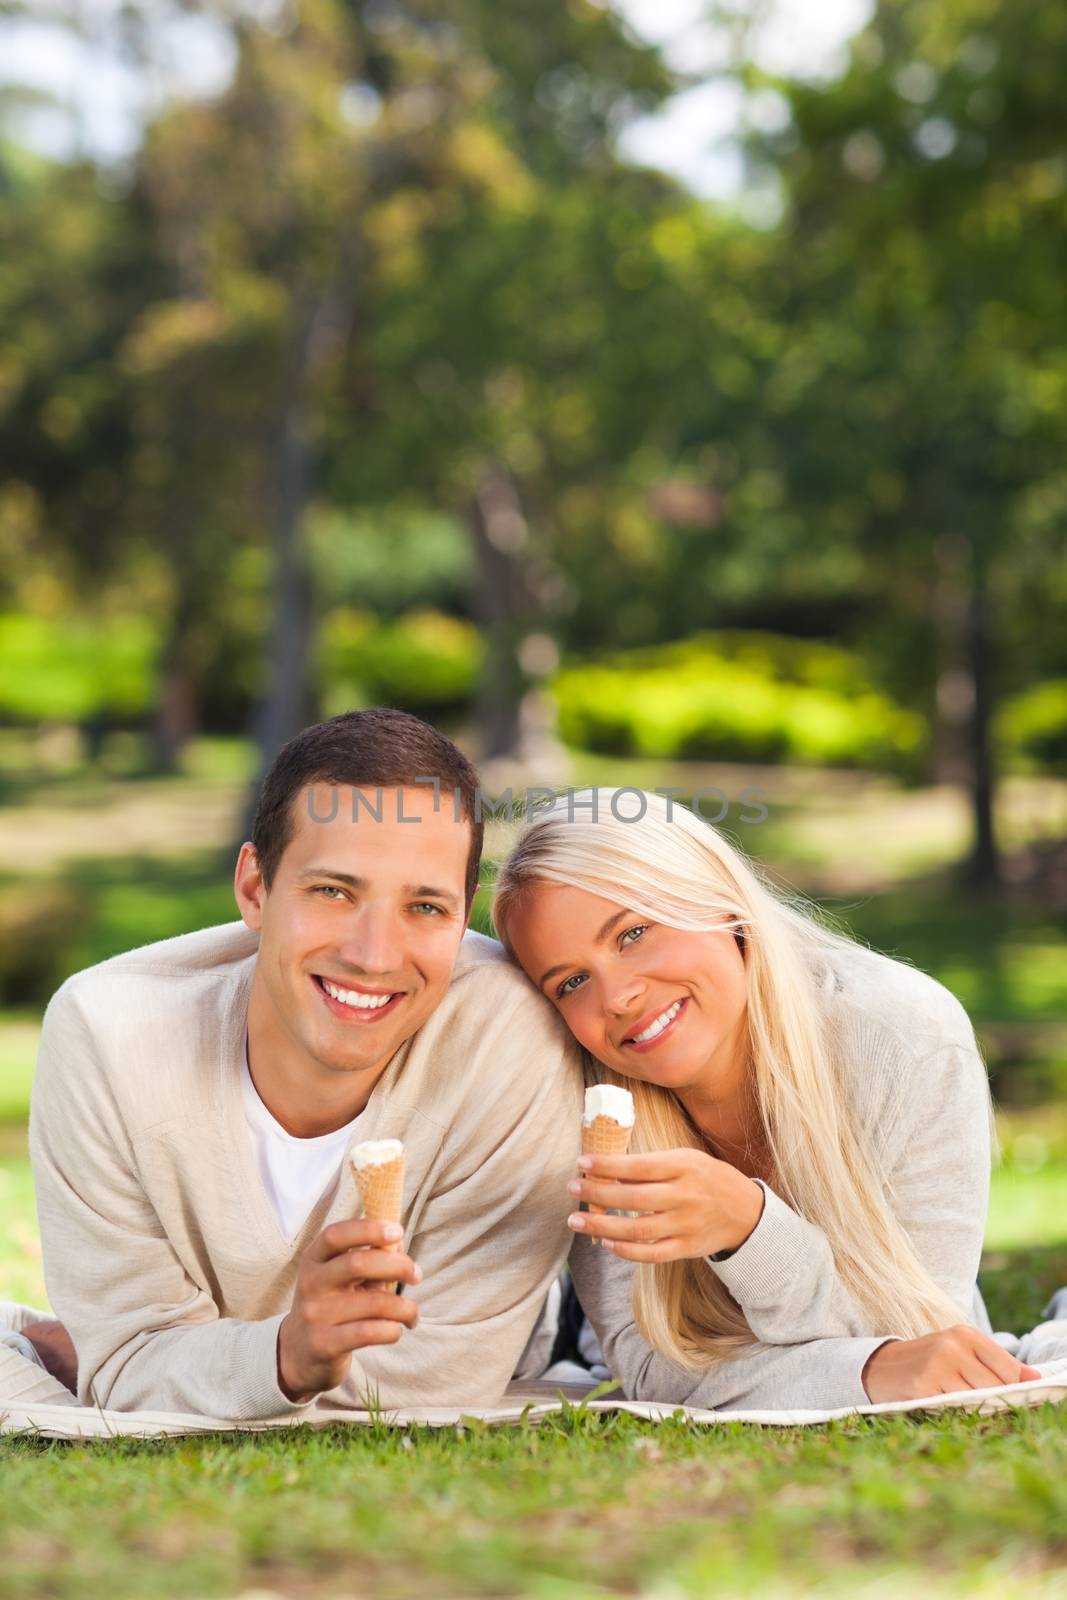 Couple in the park during the summer